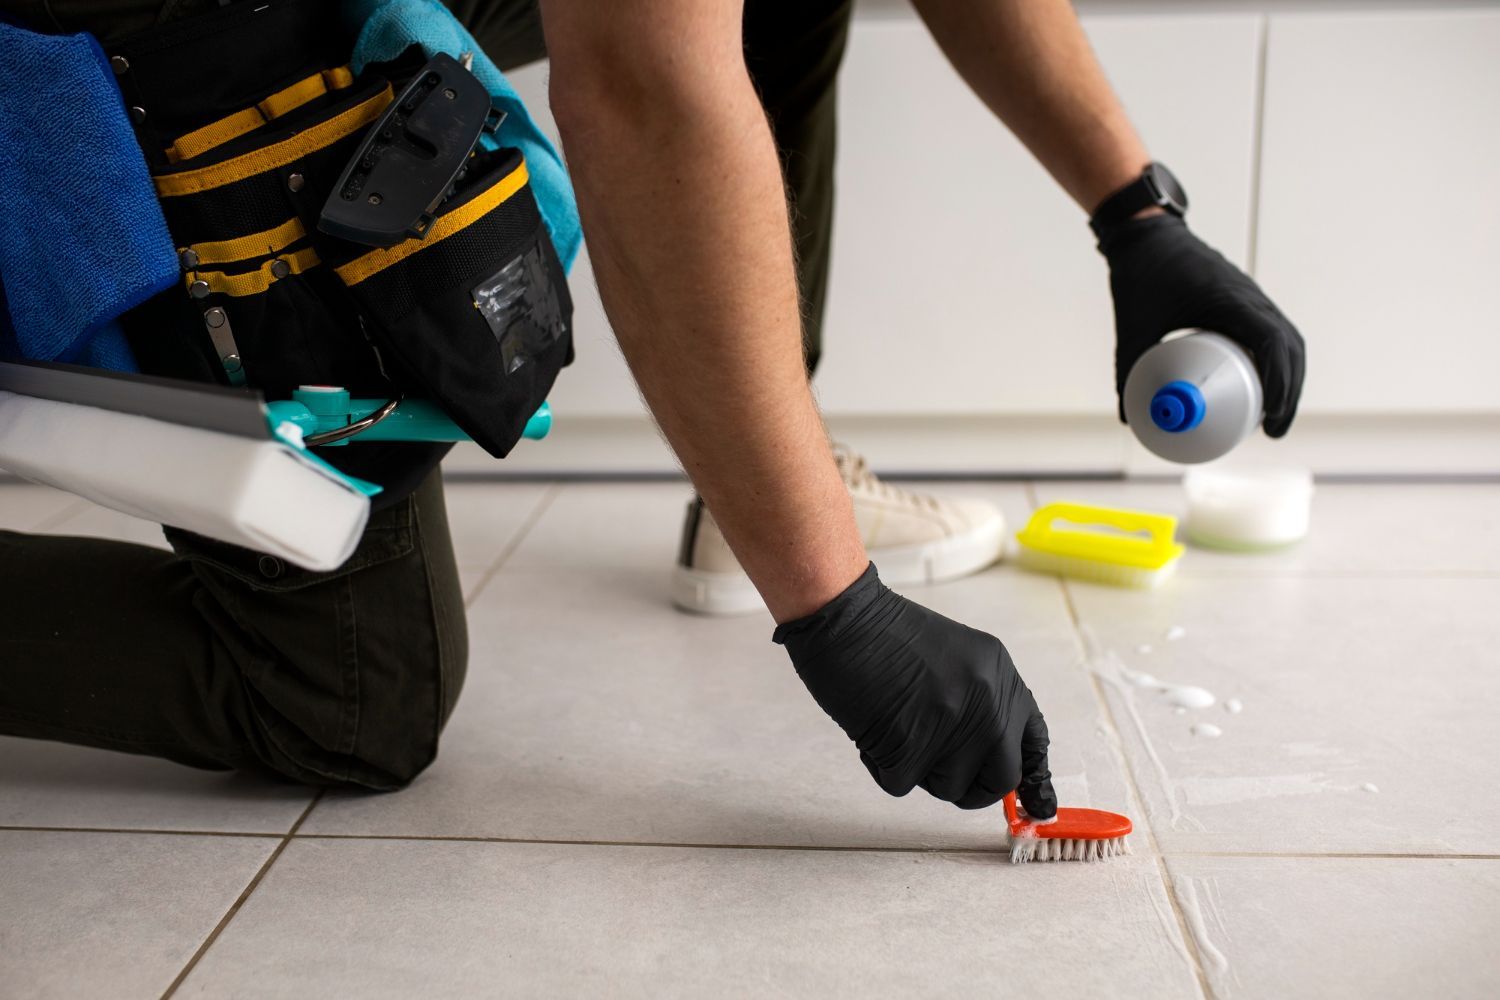 best way to clean tile grout